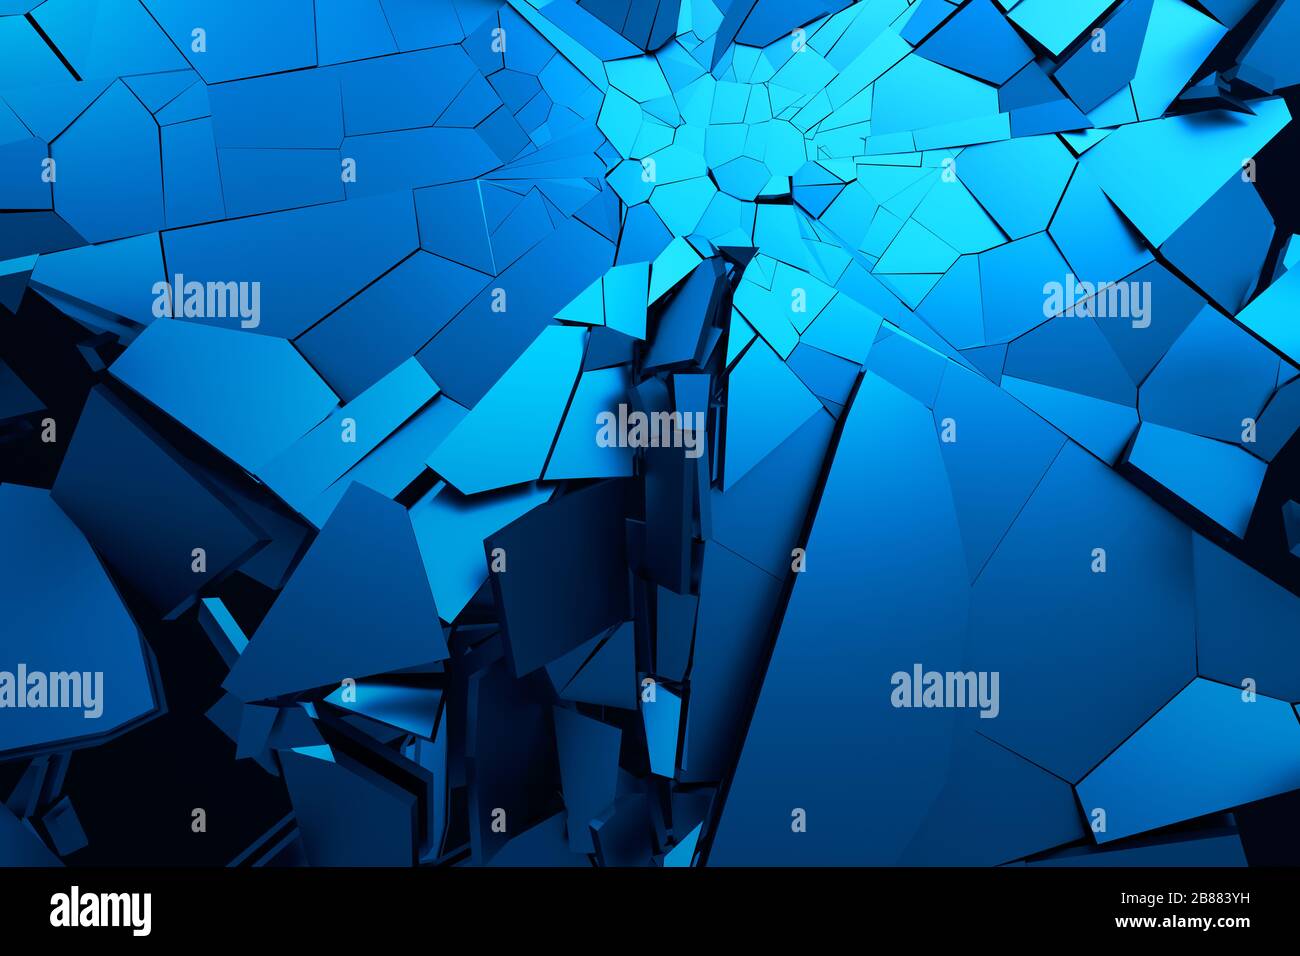 Abstract 3d rendering of cracked surface. Background with broken shape. Wall destruction. Bursting with debris. Modern cgi illustration. Stock Photo